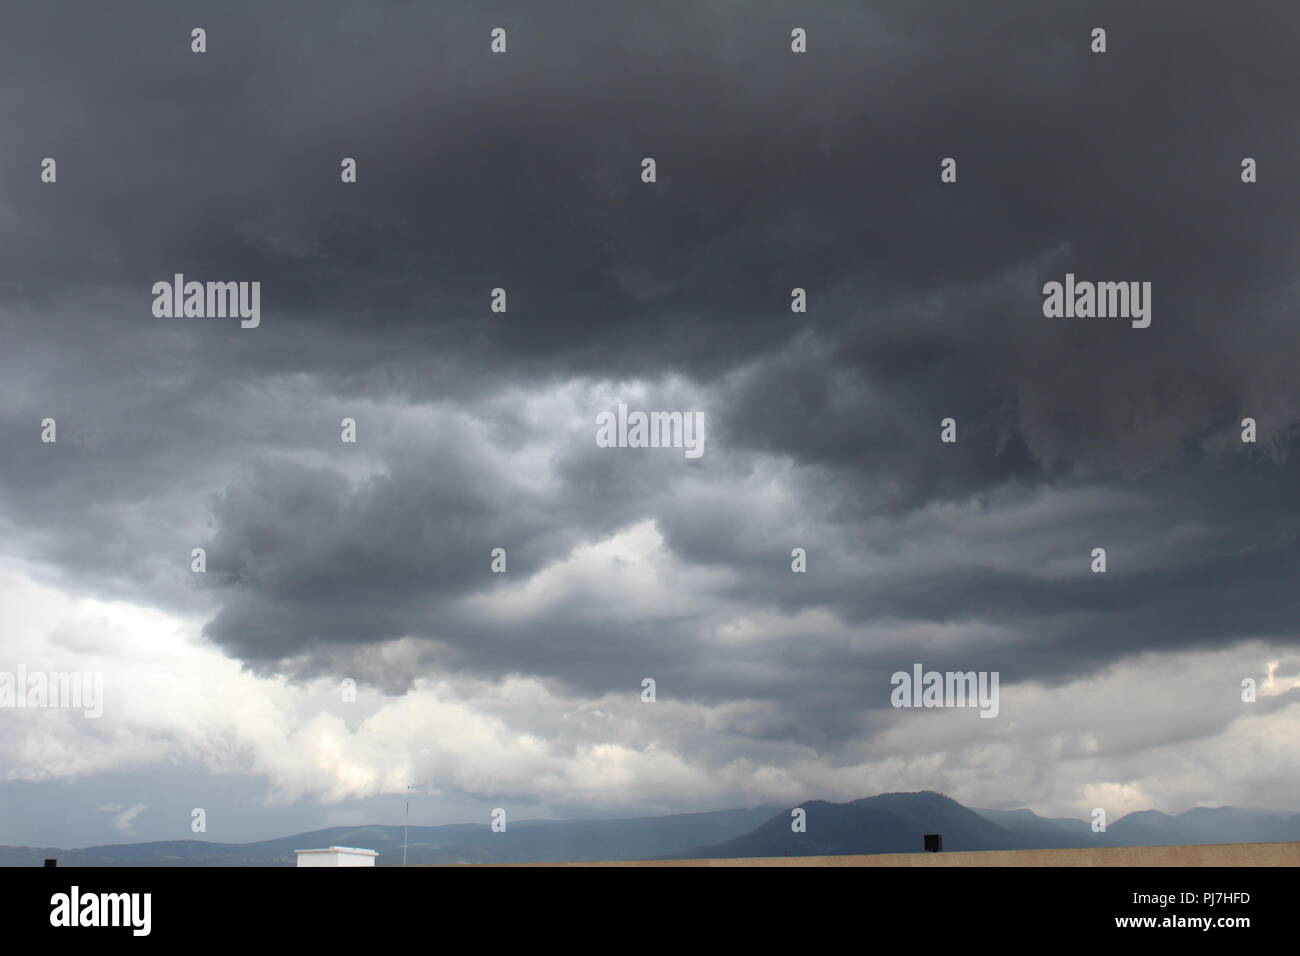 Nubes apunto del llover.  Clouds about to rain. Stock Photo